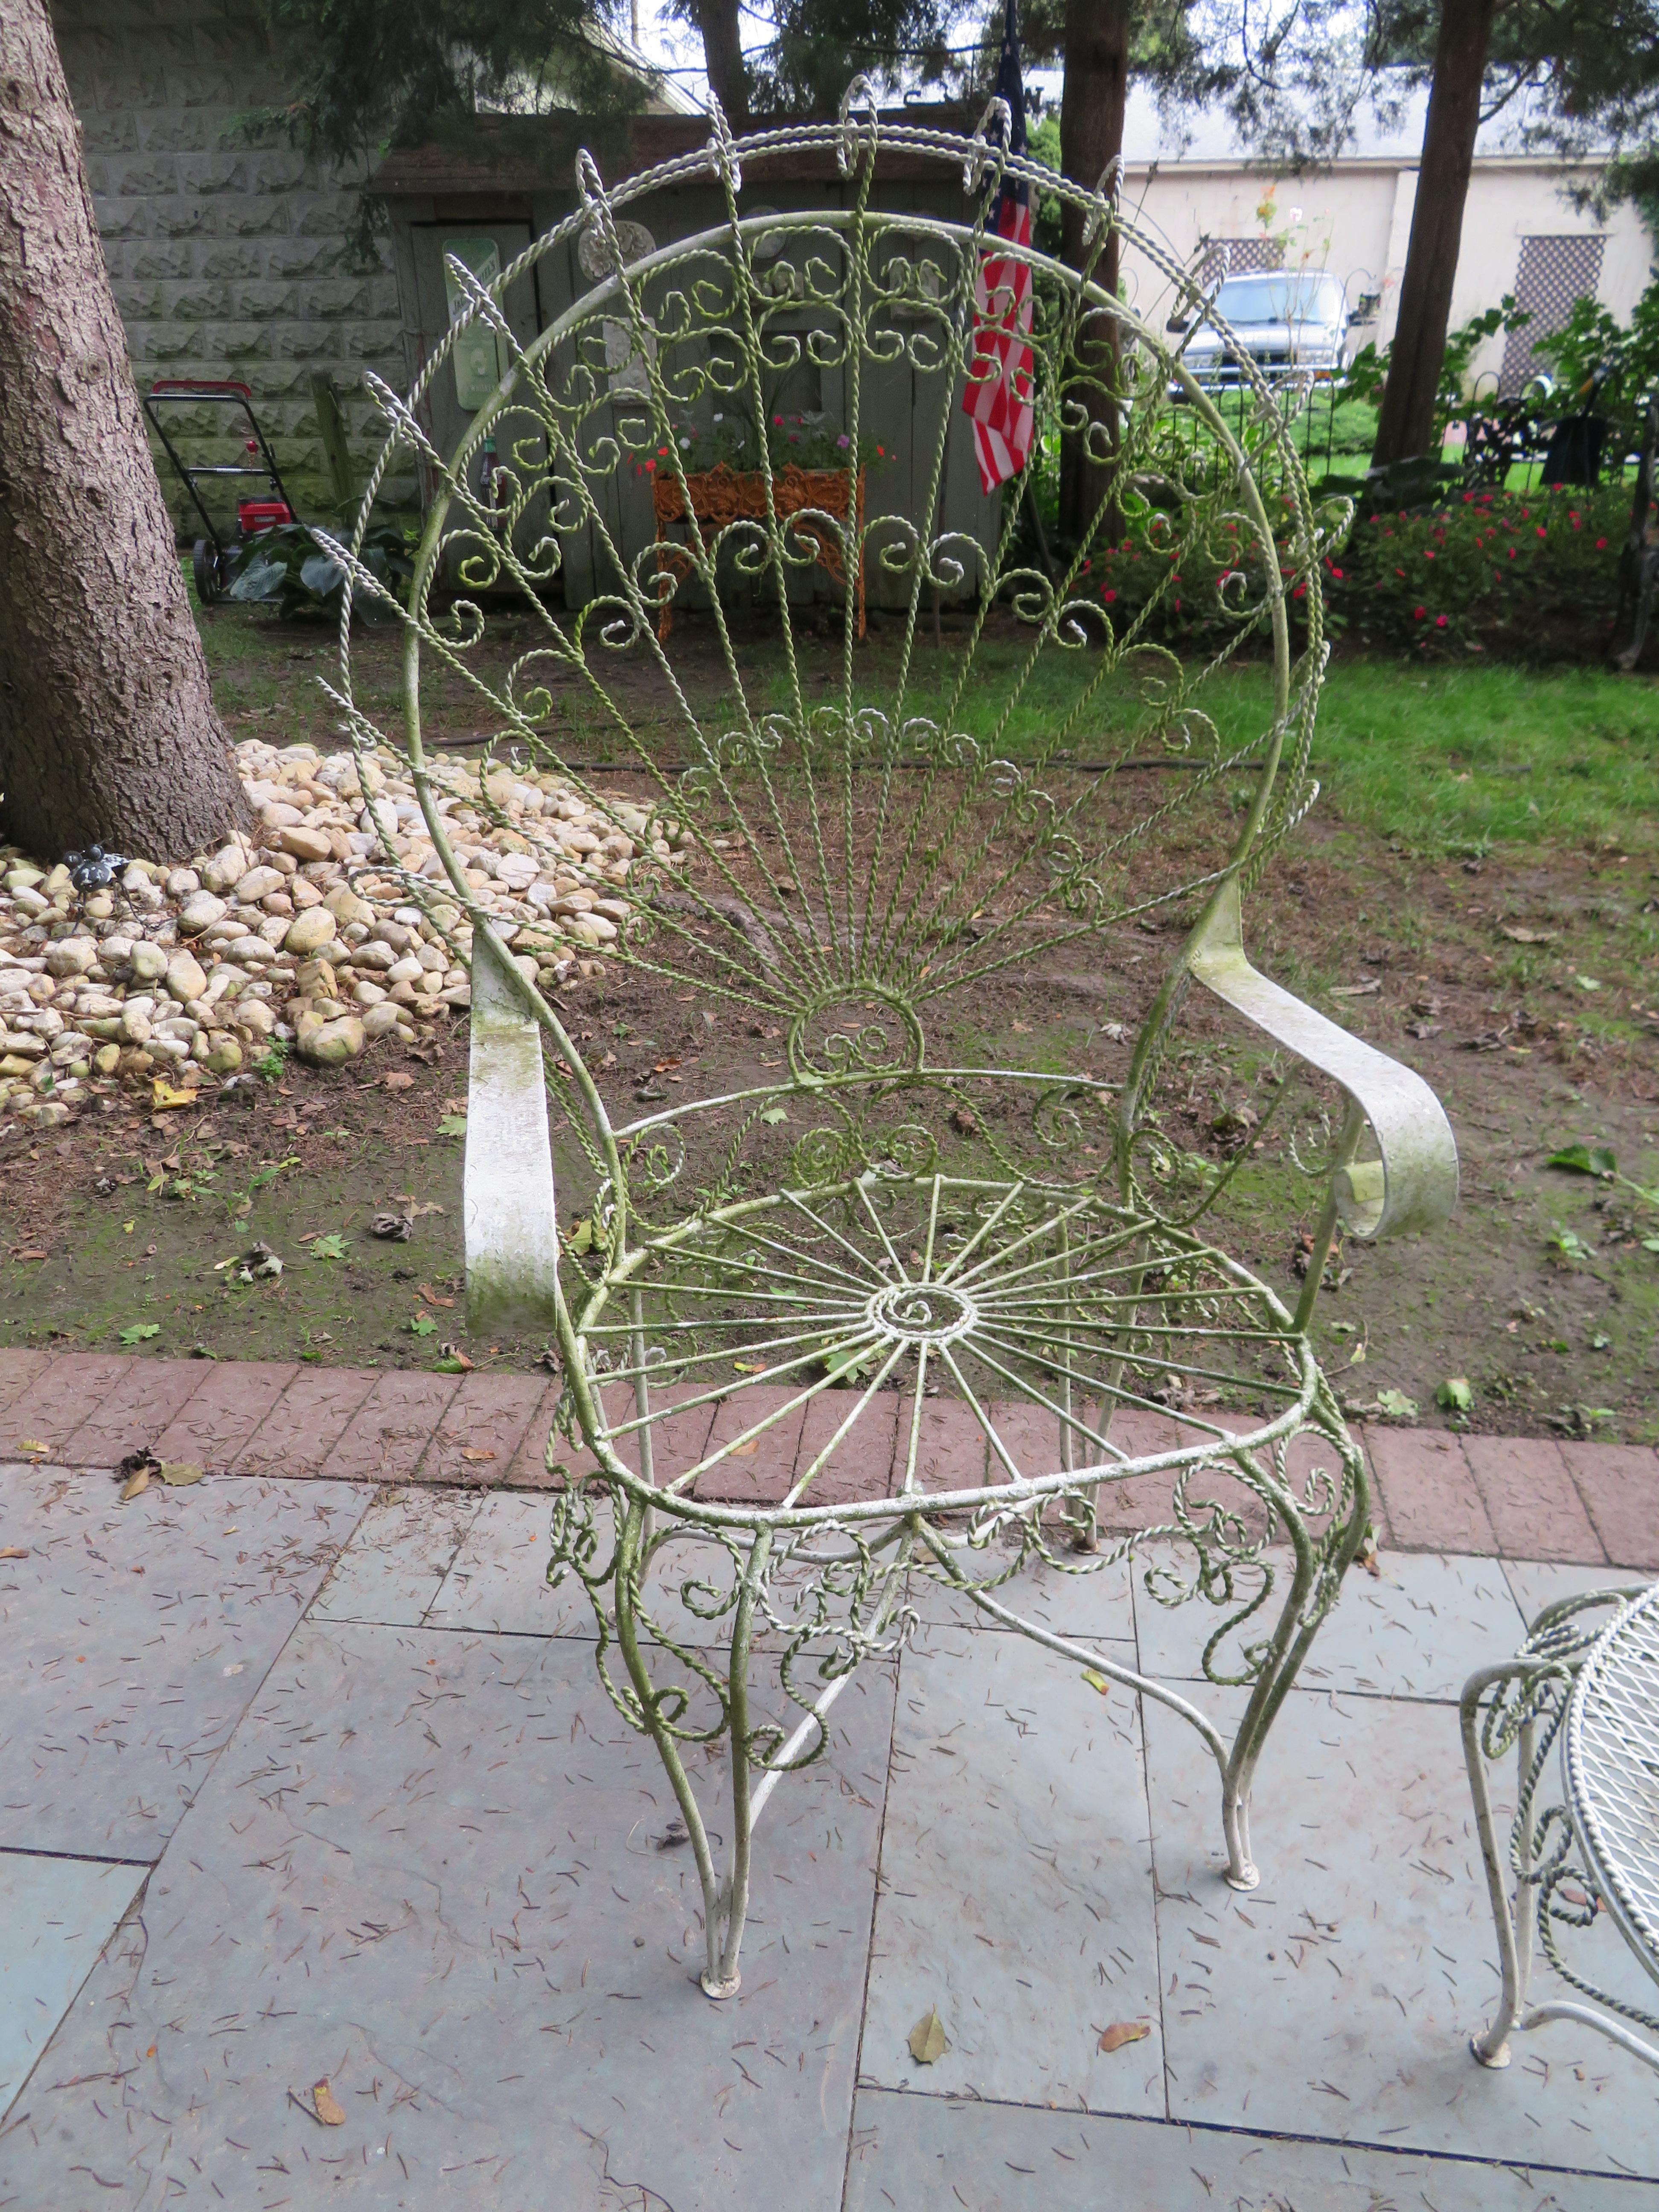 Gorgeous pair of Salterini ornate wrought iron twisted wire fan back patio chairs with matching side table. This pair is in vintage condition retaining their original white finish showing a wonderful greenish lichen patina. There are no cracks or